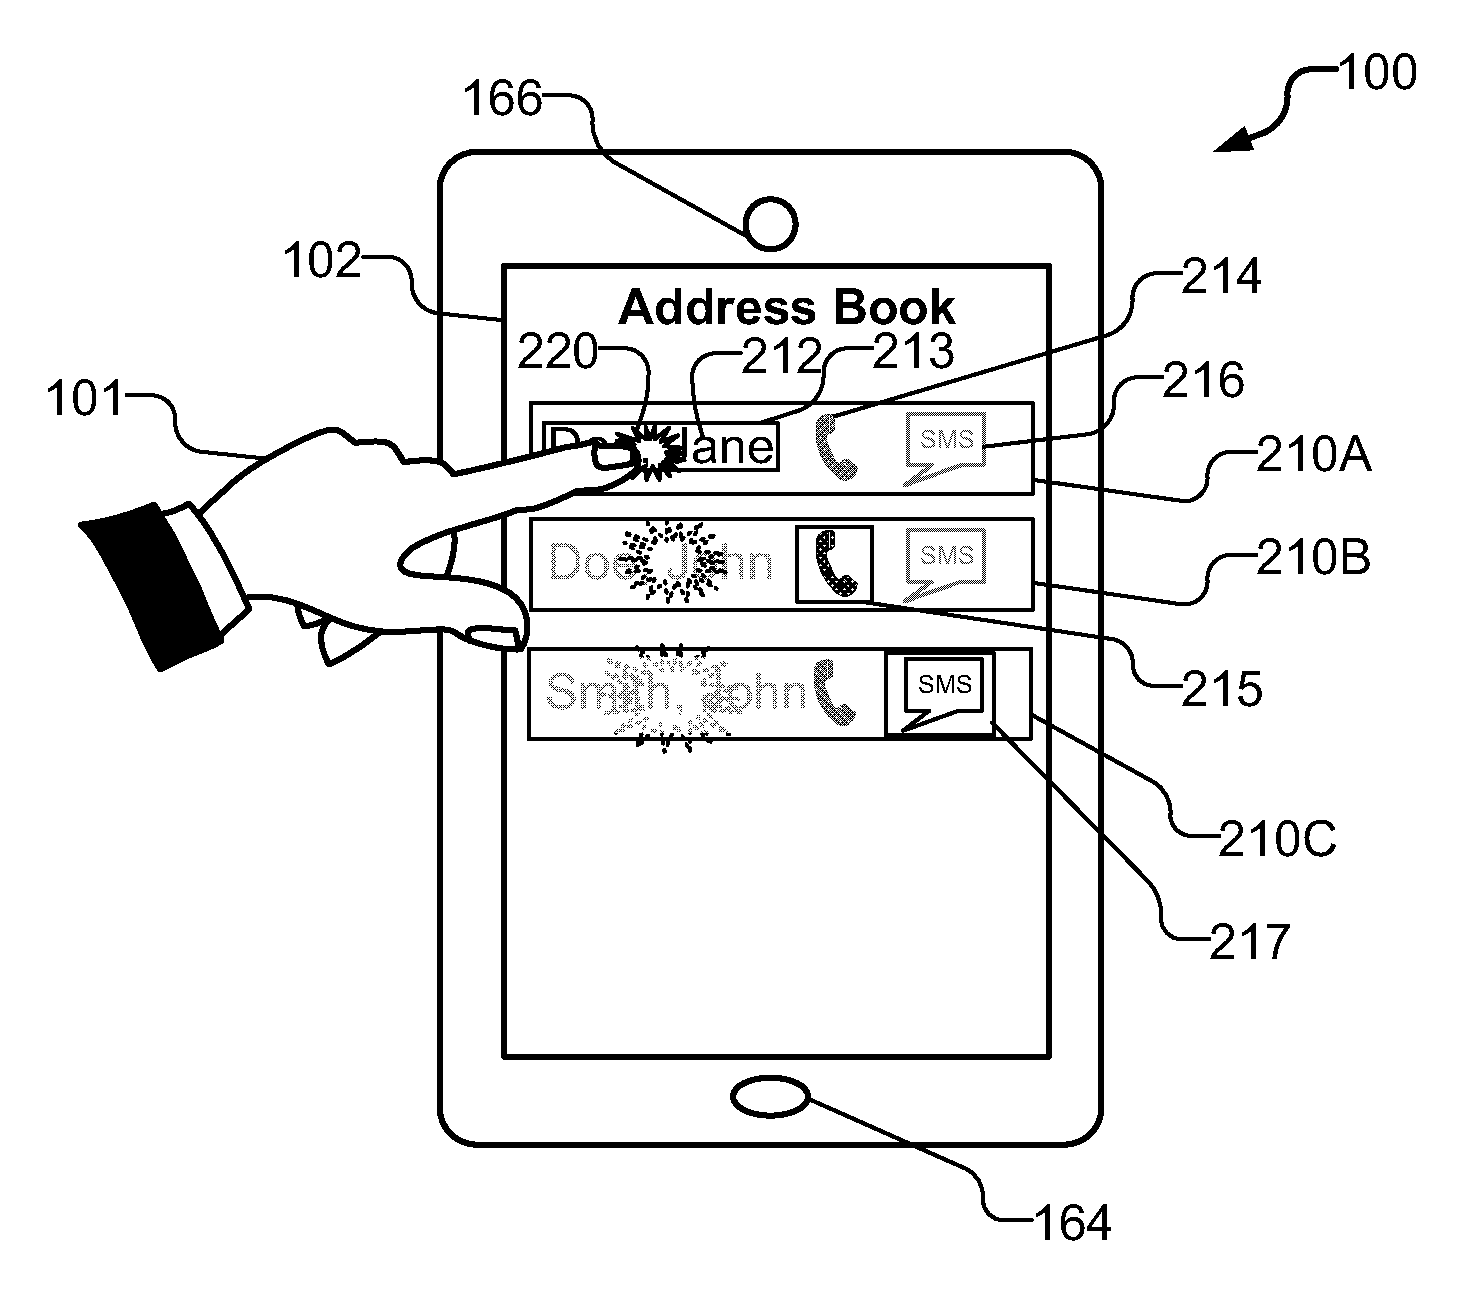 User interface elements augmented with force detection